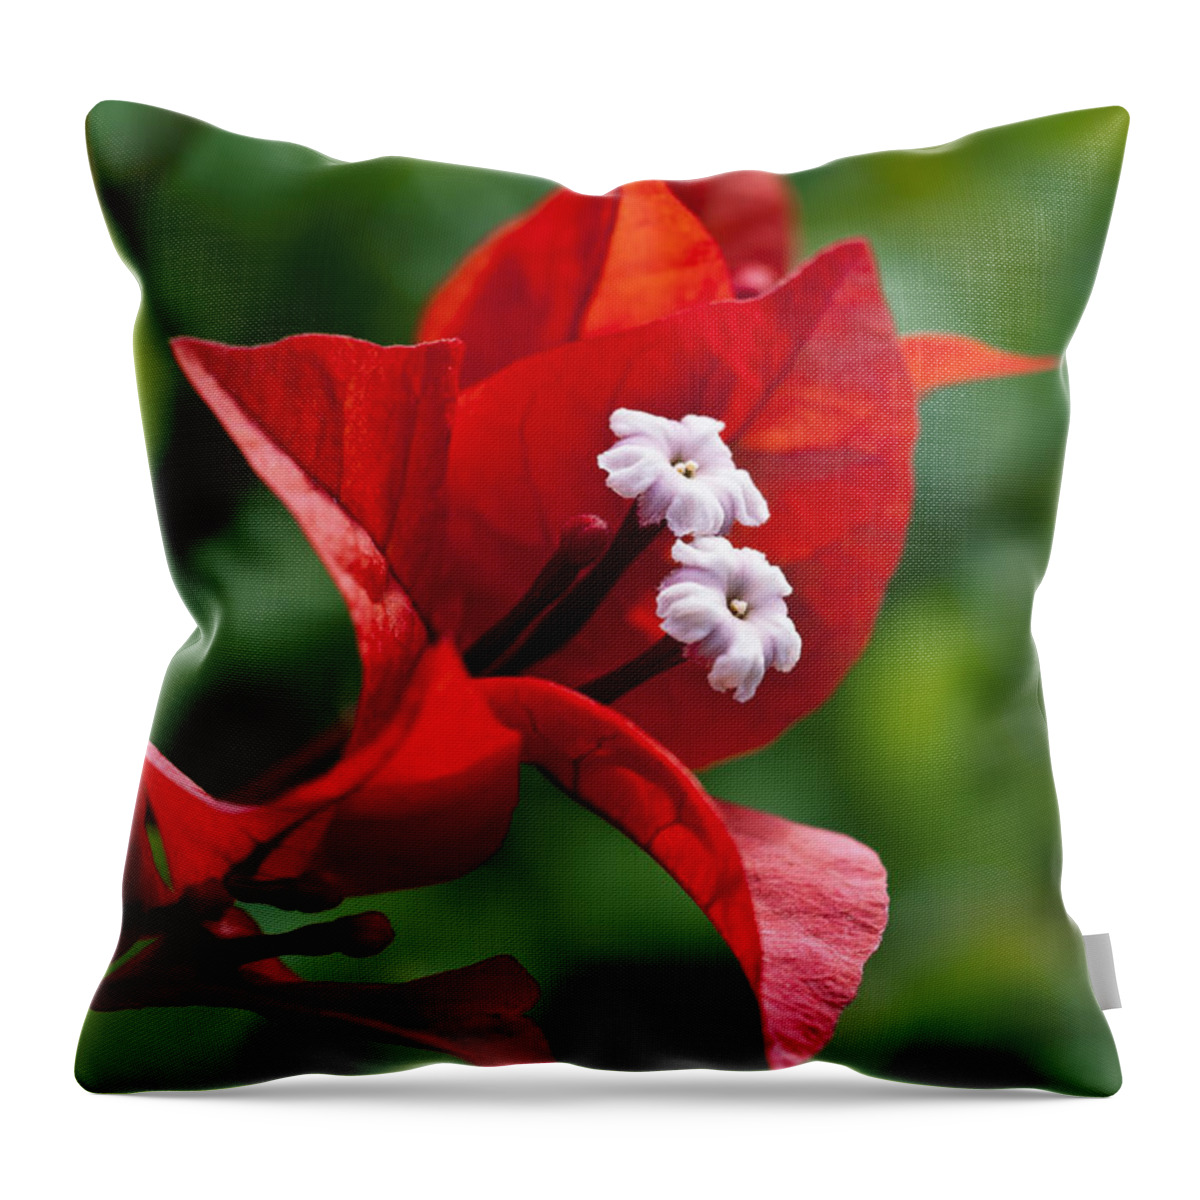 Arch Throw Pillow featuring the photograph Flame Red Bougainvillea II by Joe Carini - Printscapes